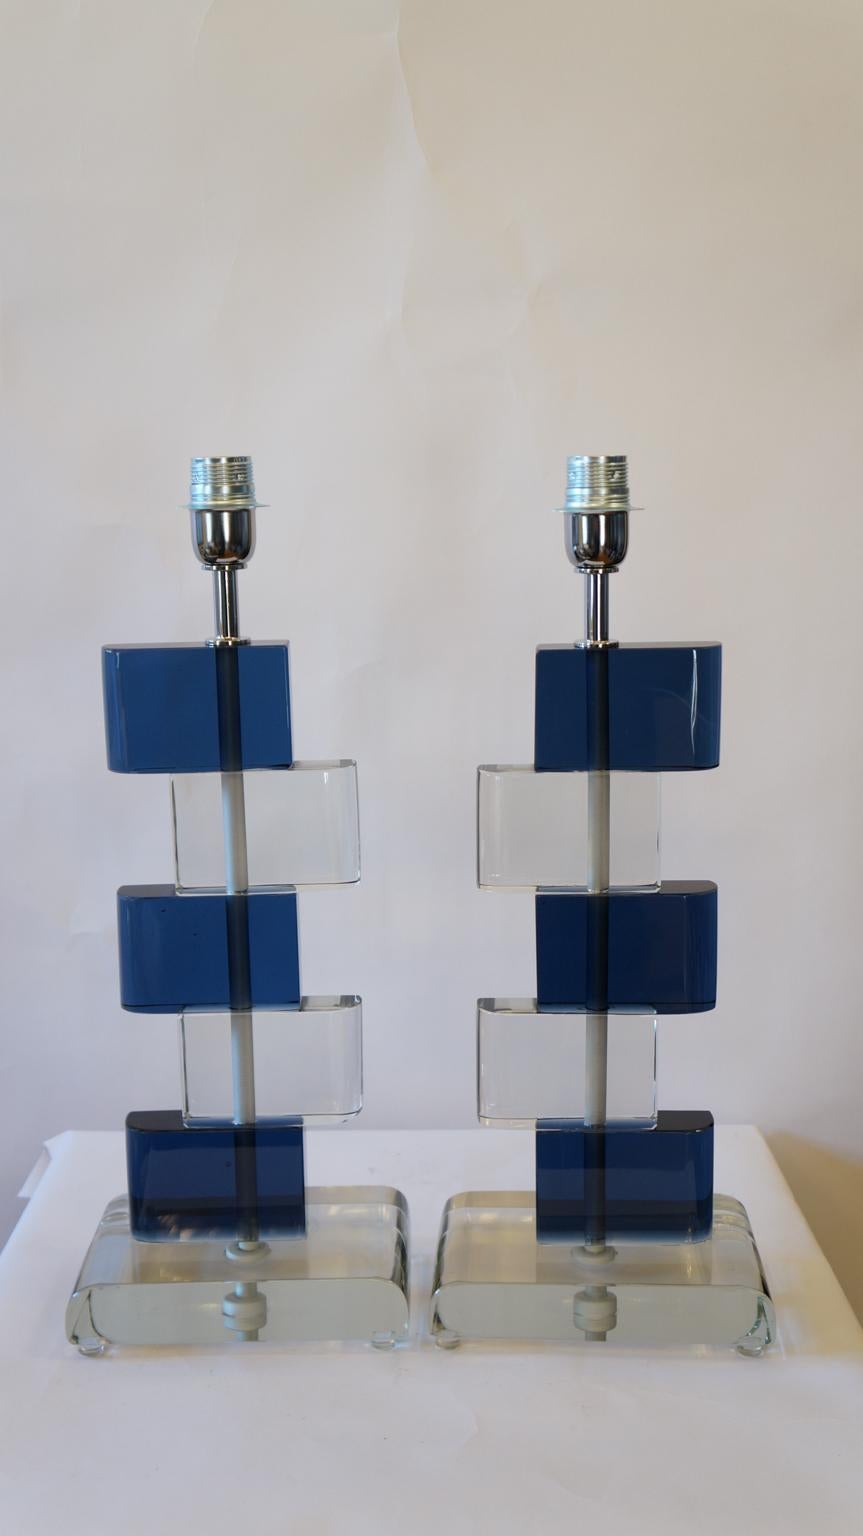 Two Murano glass table lamps by Alberto Donà in 1975. 
In it we can see simplicity, elegance, linearity. It is, in fact, a simple model, and it is thanks to its colors that its beauty stands out. 
We note in fact the combination of blue and